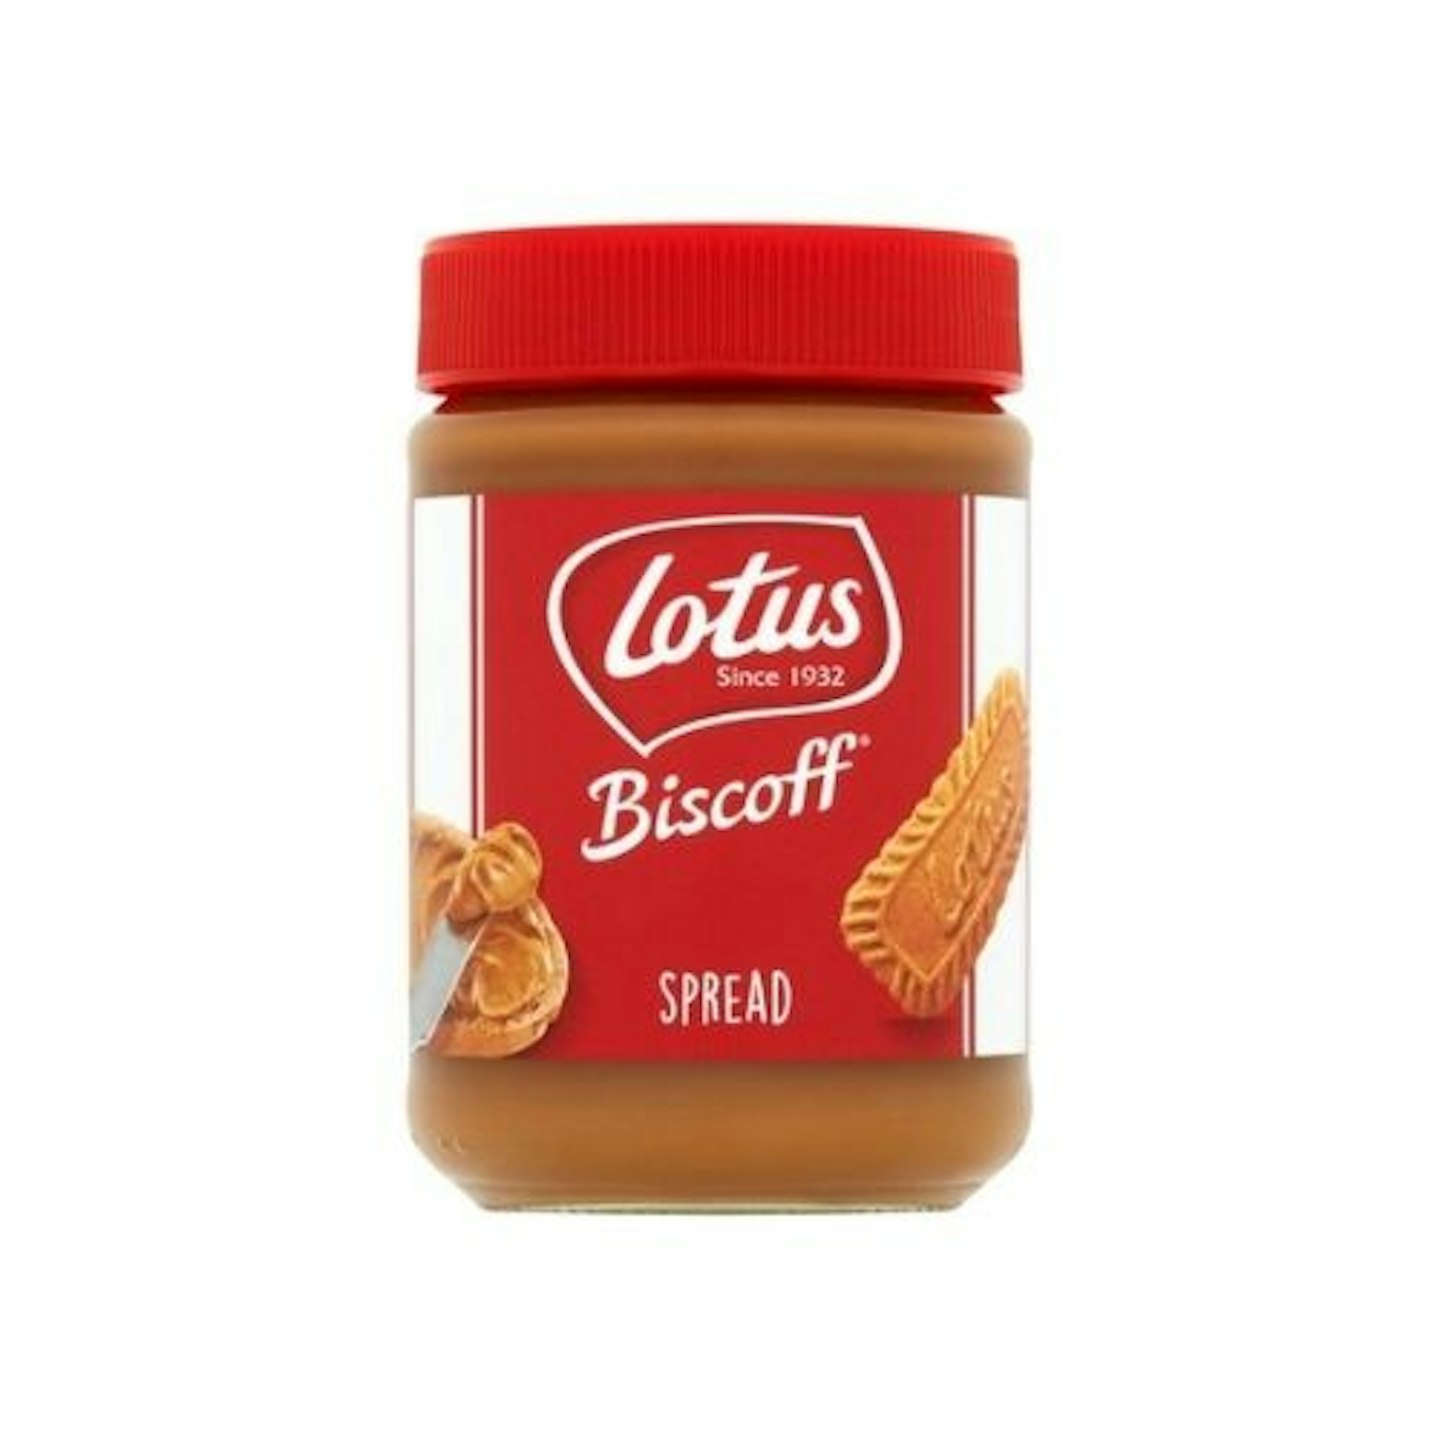 Lotus Biscuit Spread Smooth